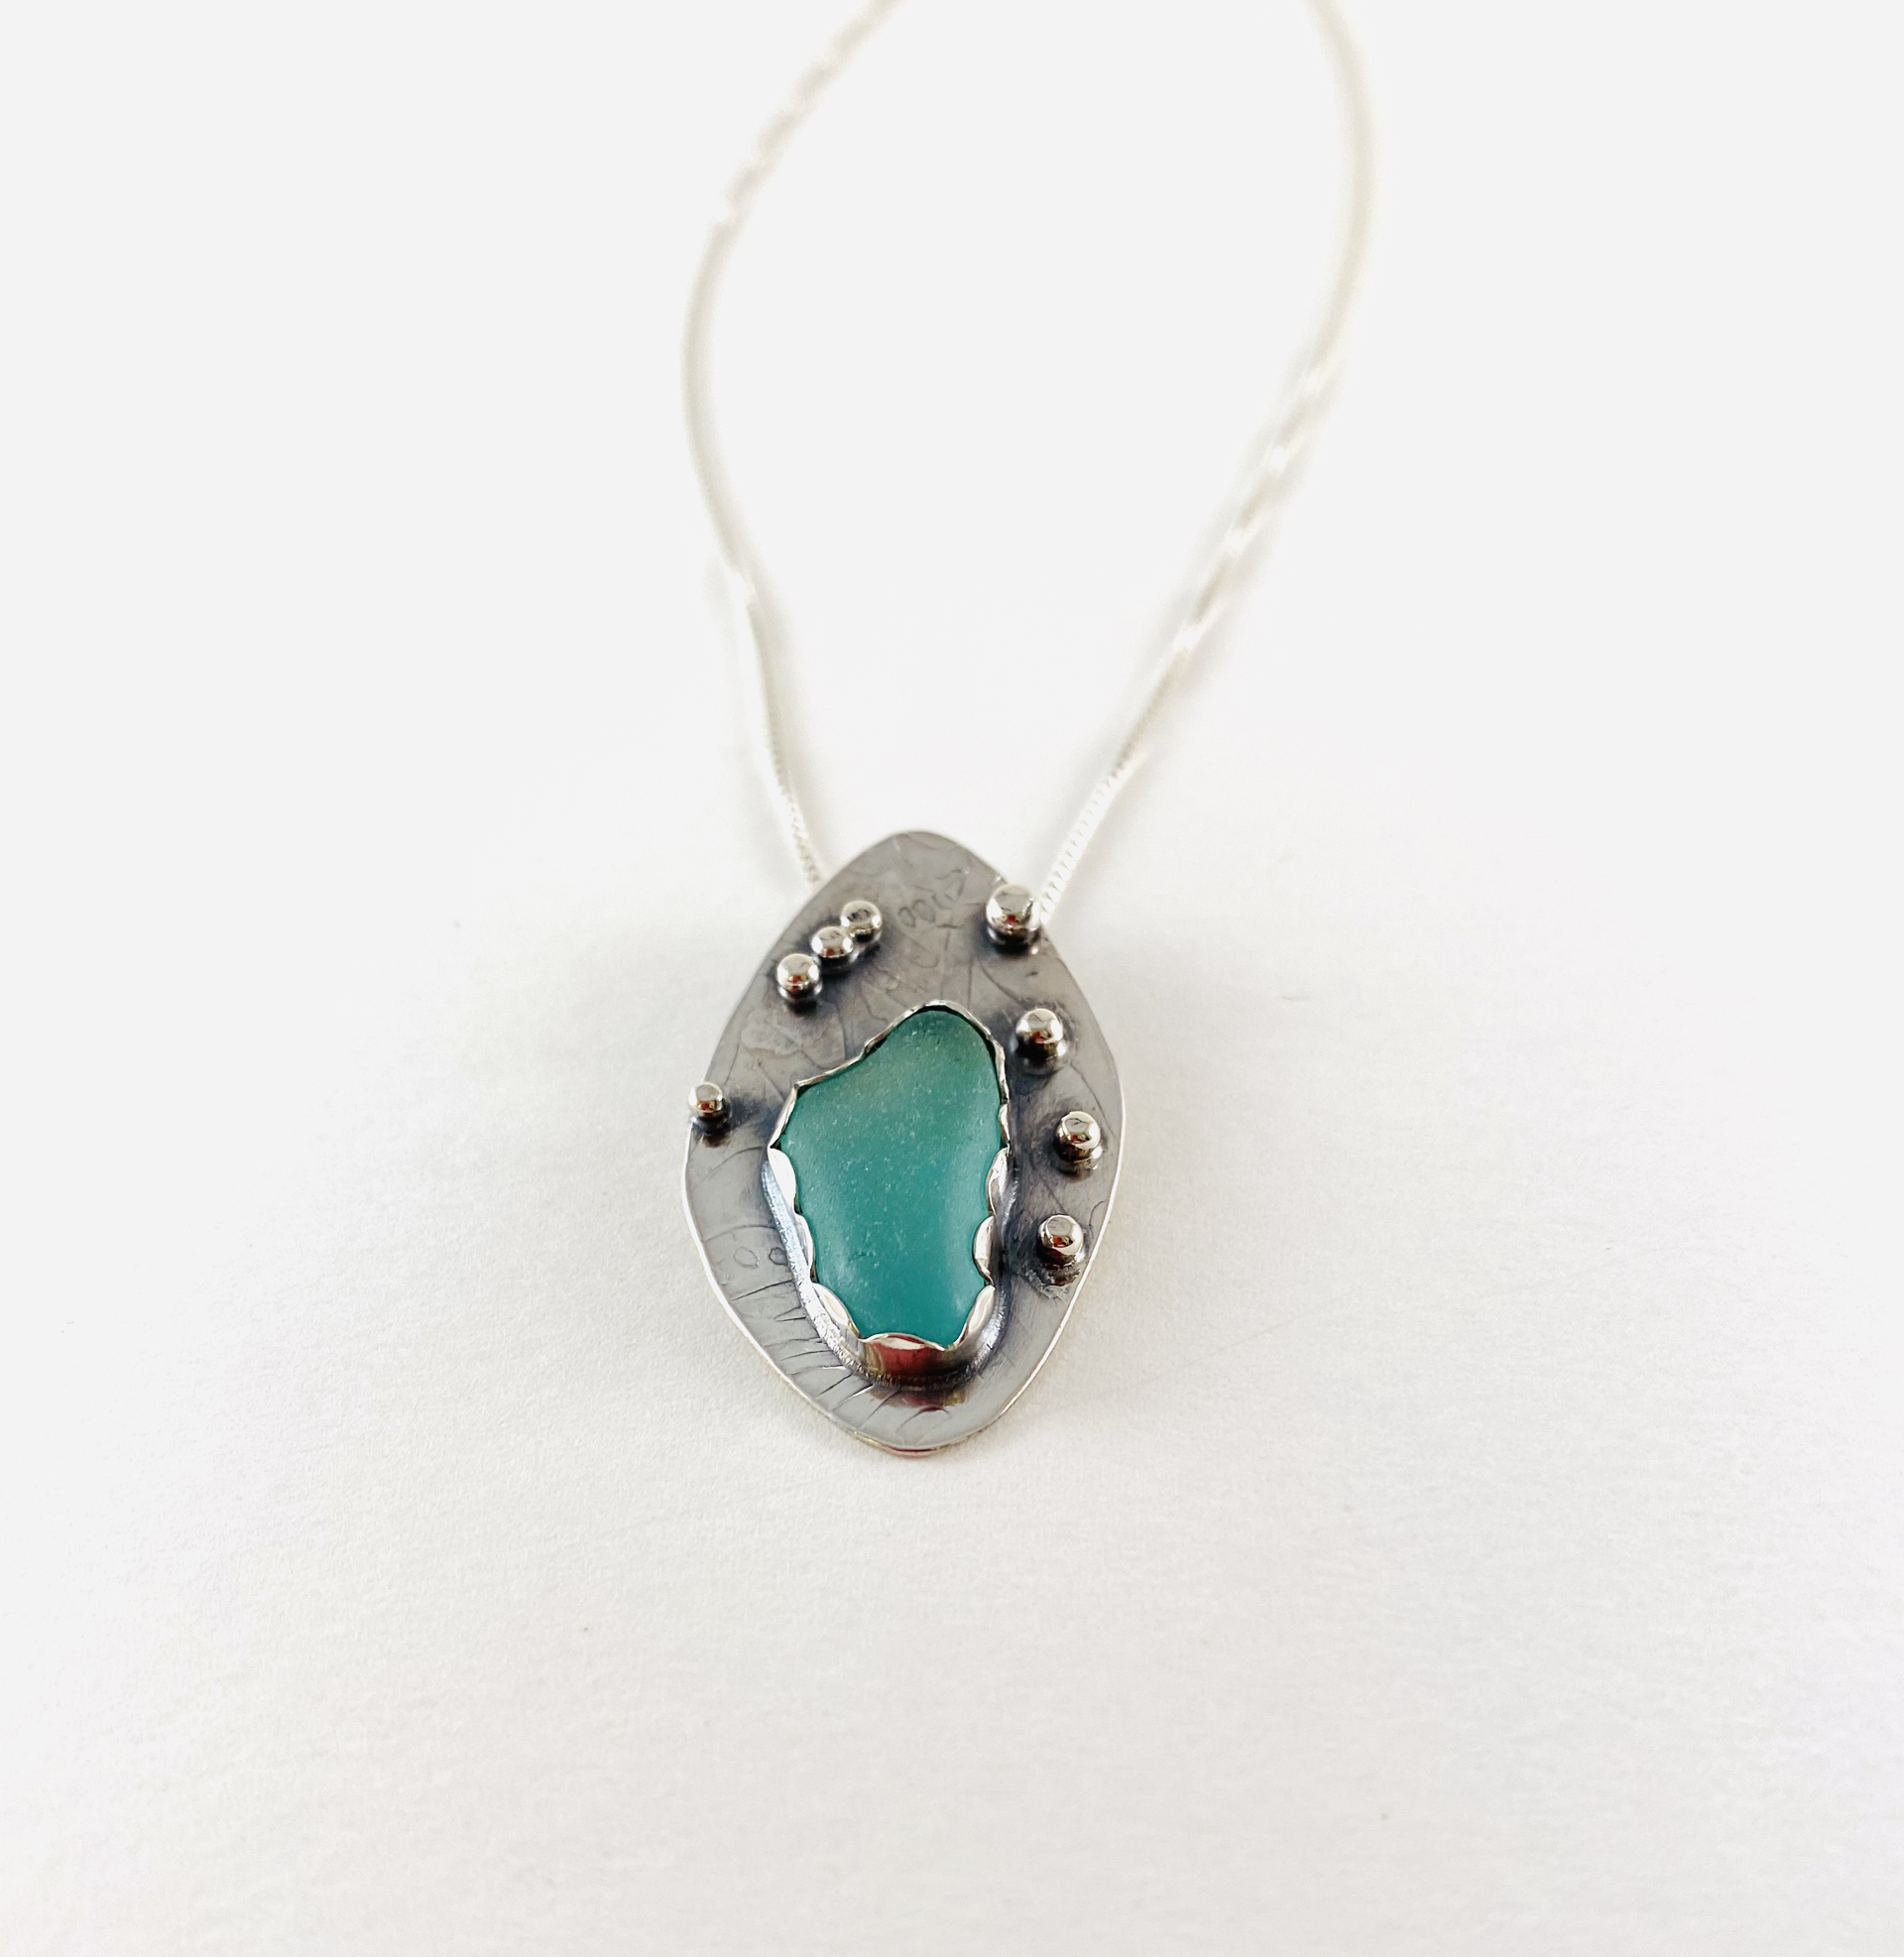 Silver and Sea Glass Pendant on  Silver Box Chain; #102 by Anne Bivens